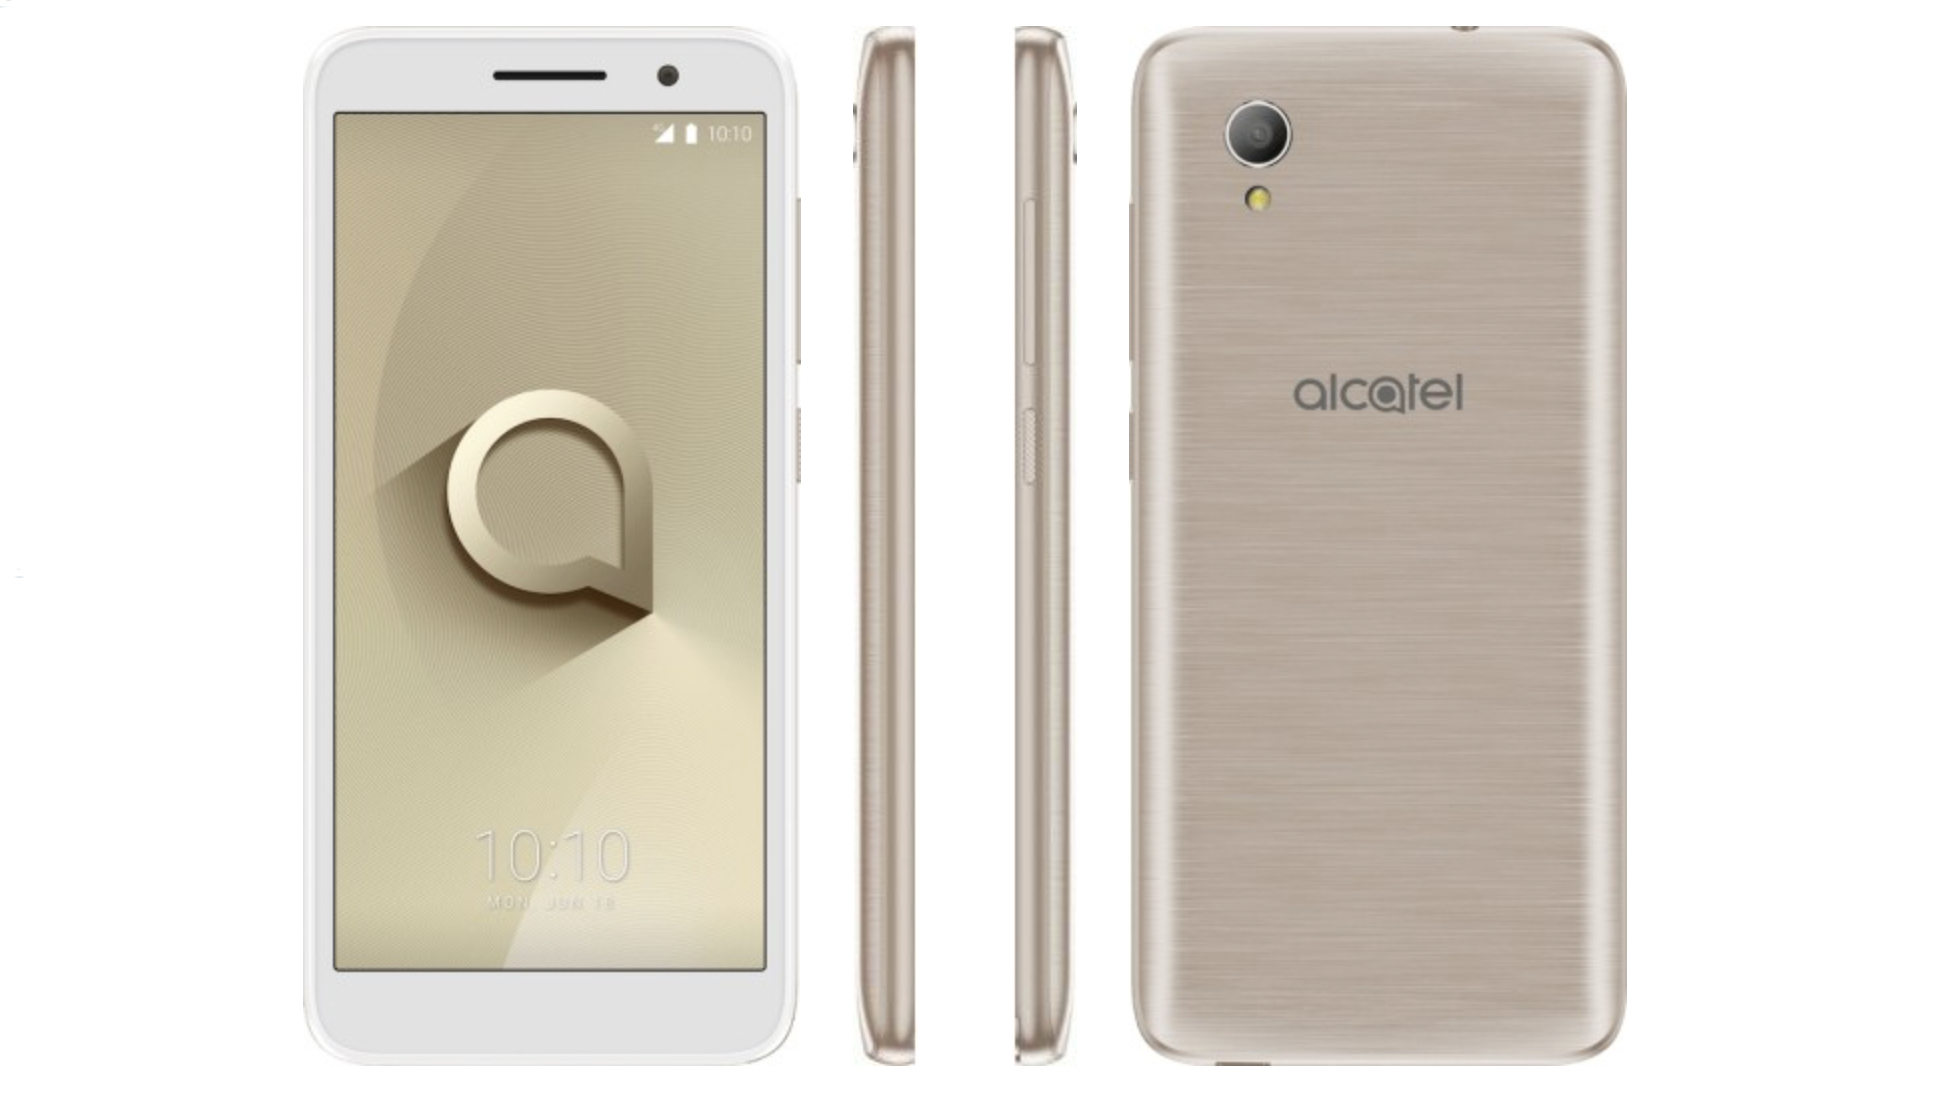 The Alcatel 1 with Android Go.